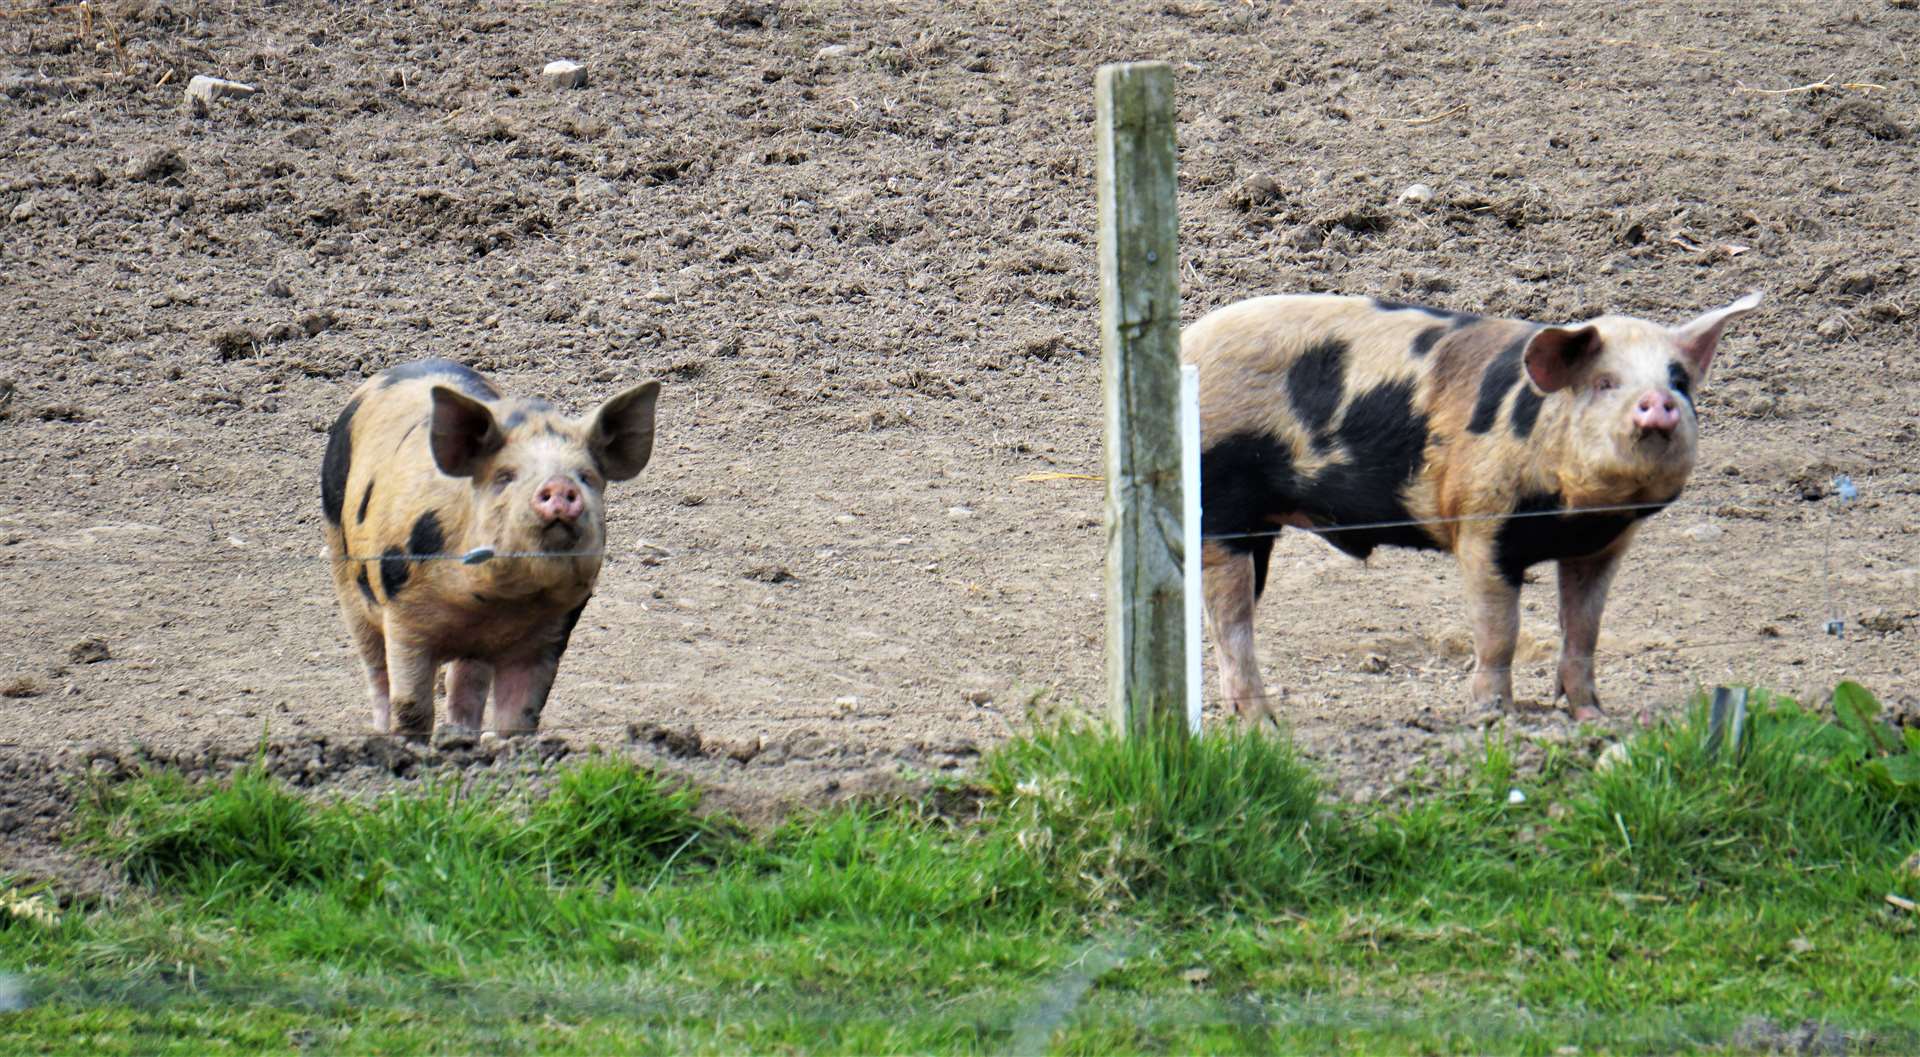 The pigs are free range and move to different areas around the farm. Picture: DGS